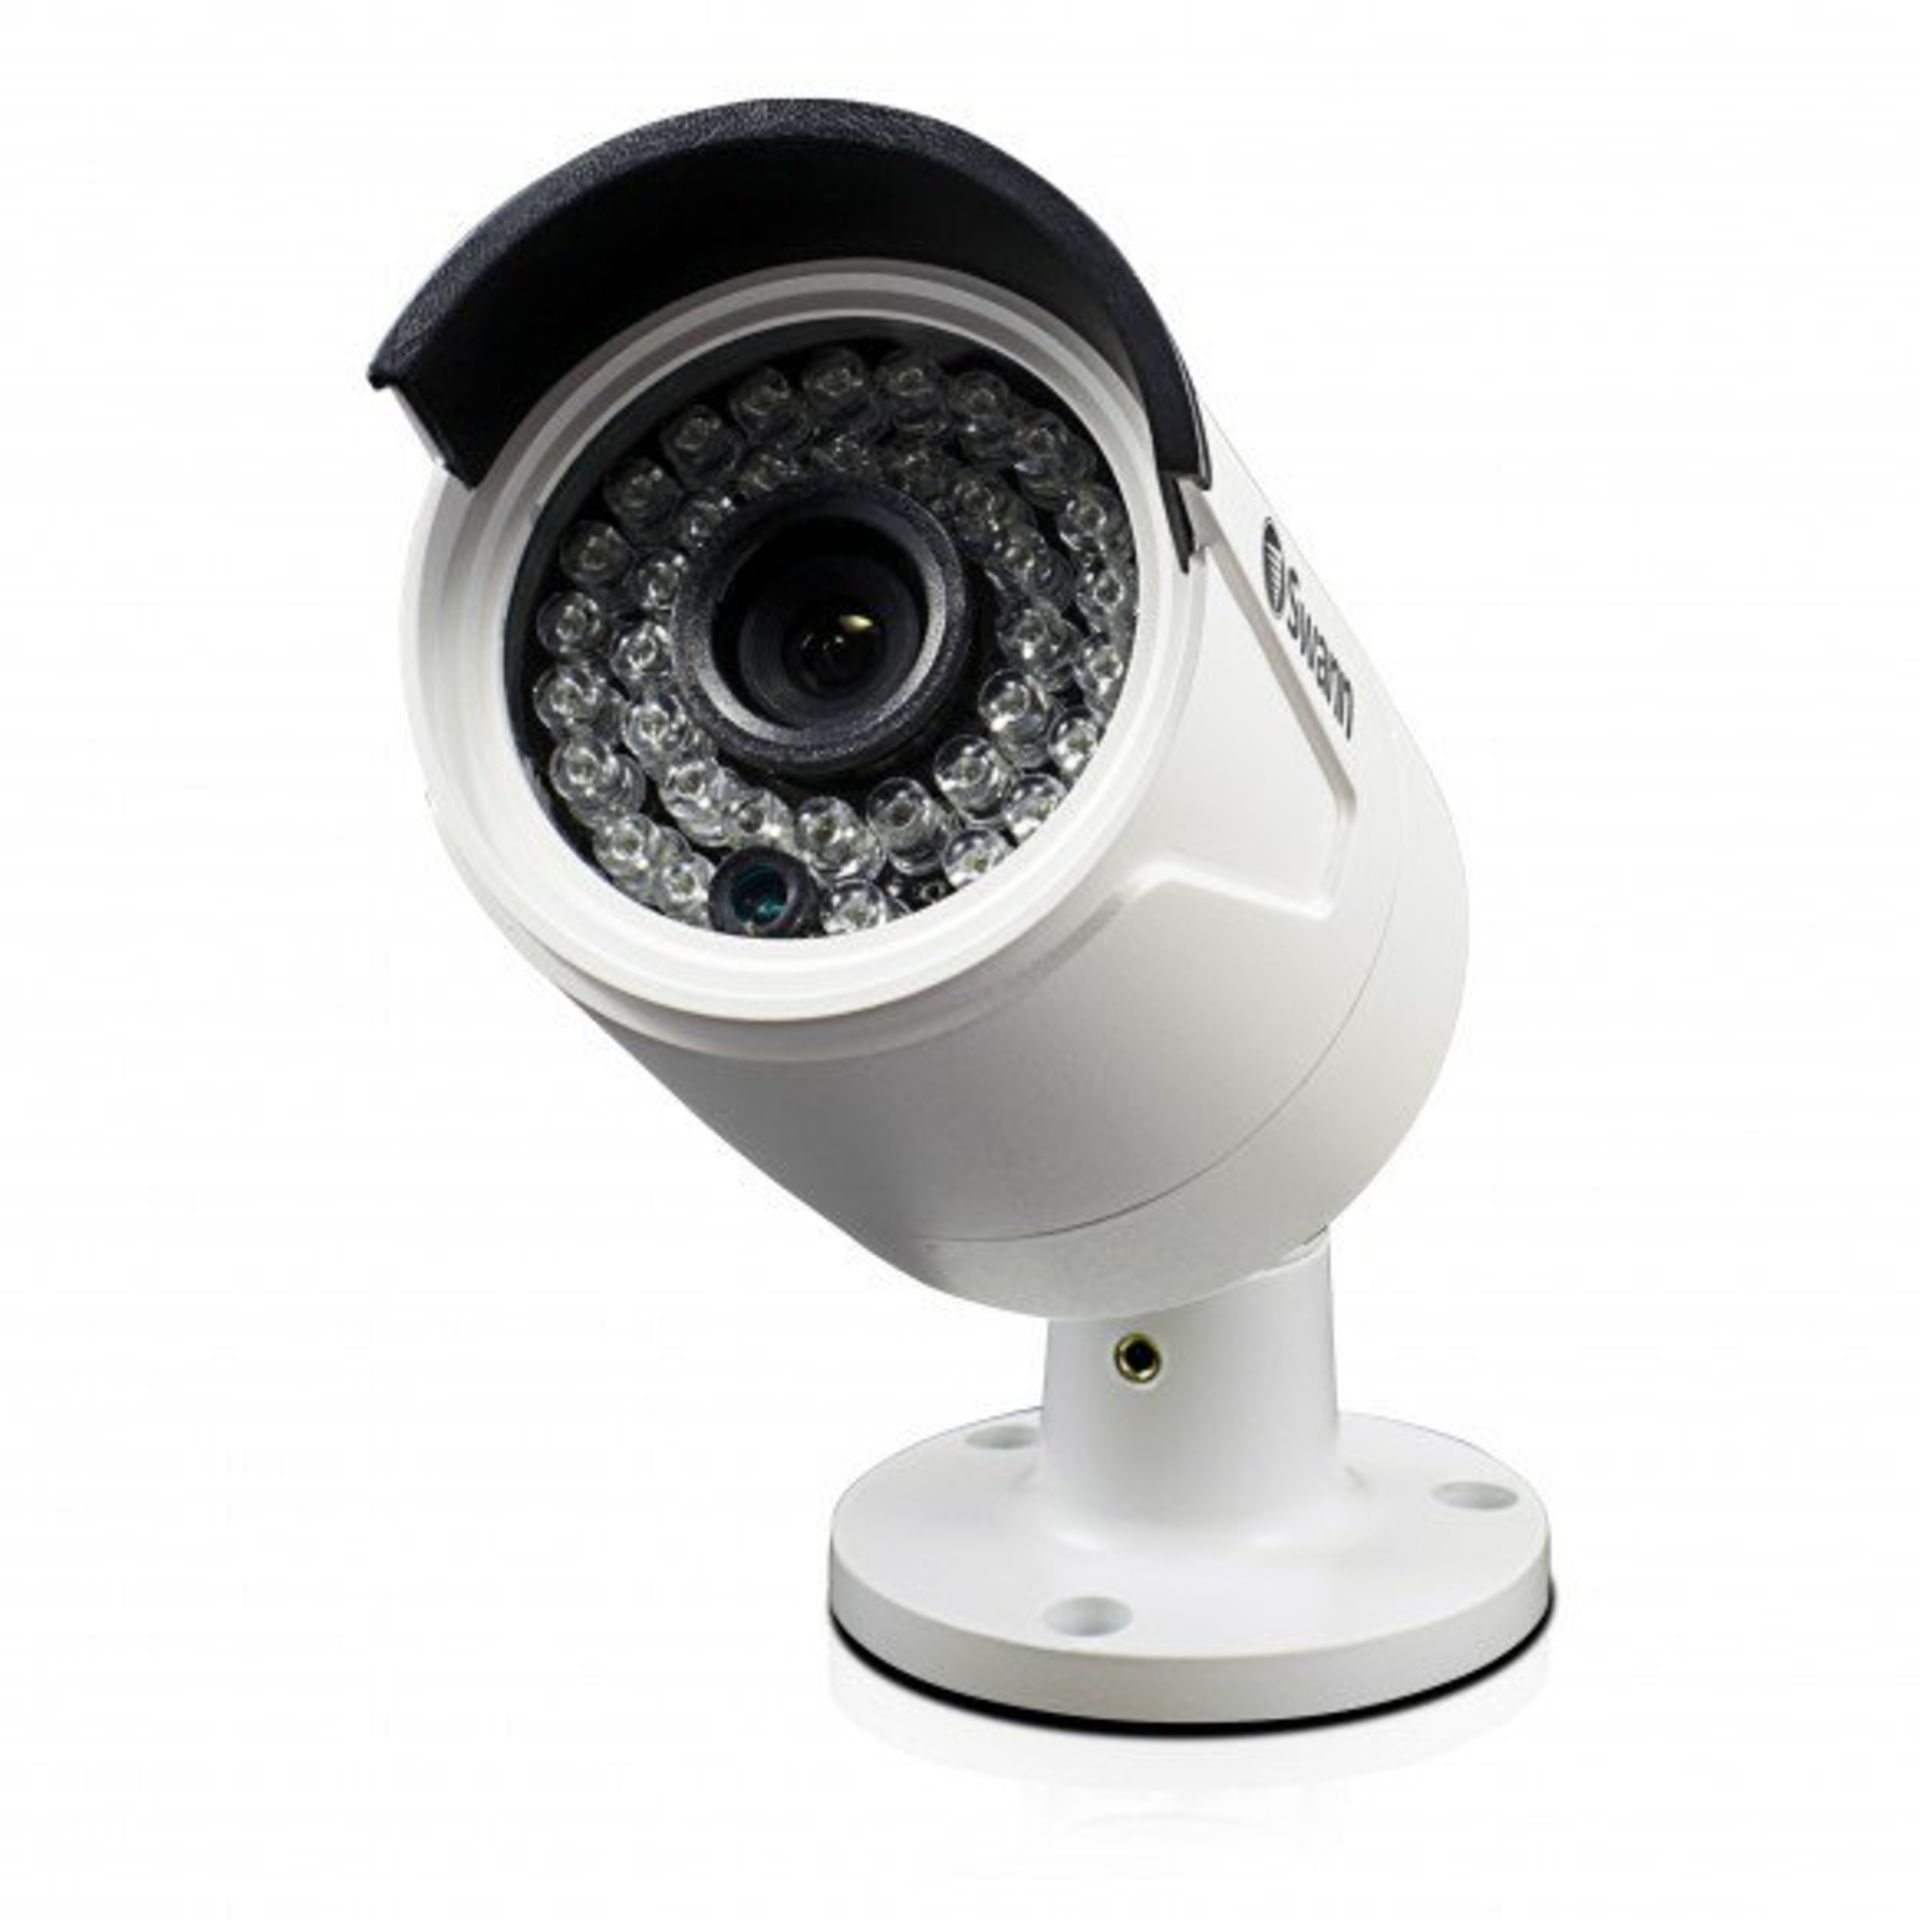 V Grade A Swann NHD 818CAM Super HD Day/Night Security Camera - Night Vision 100ft - IP66 Rated